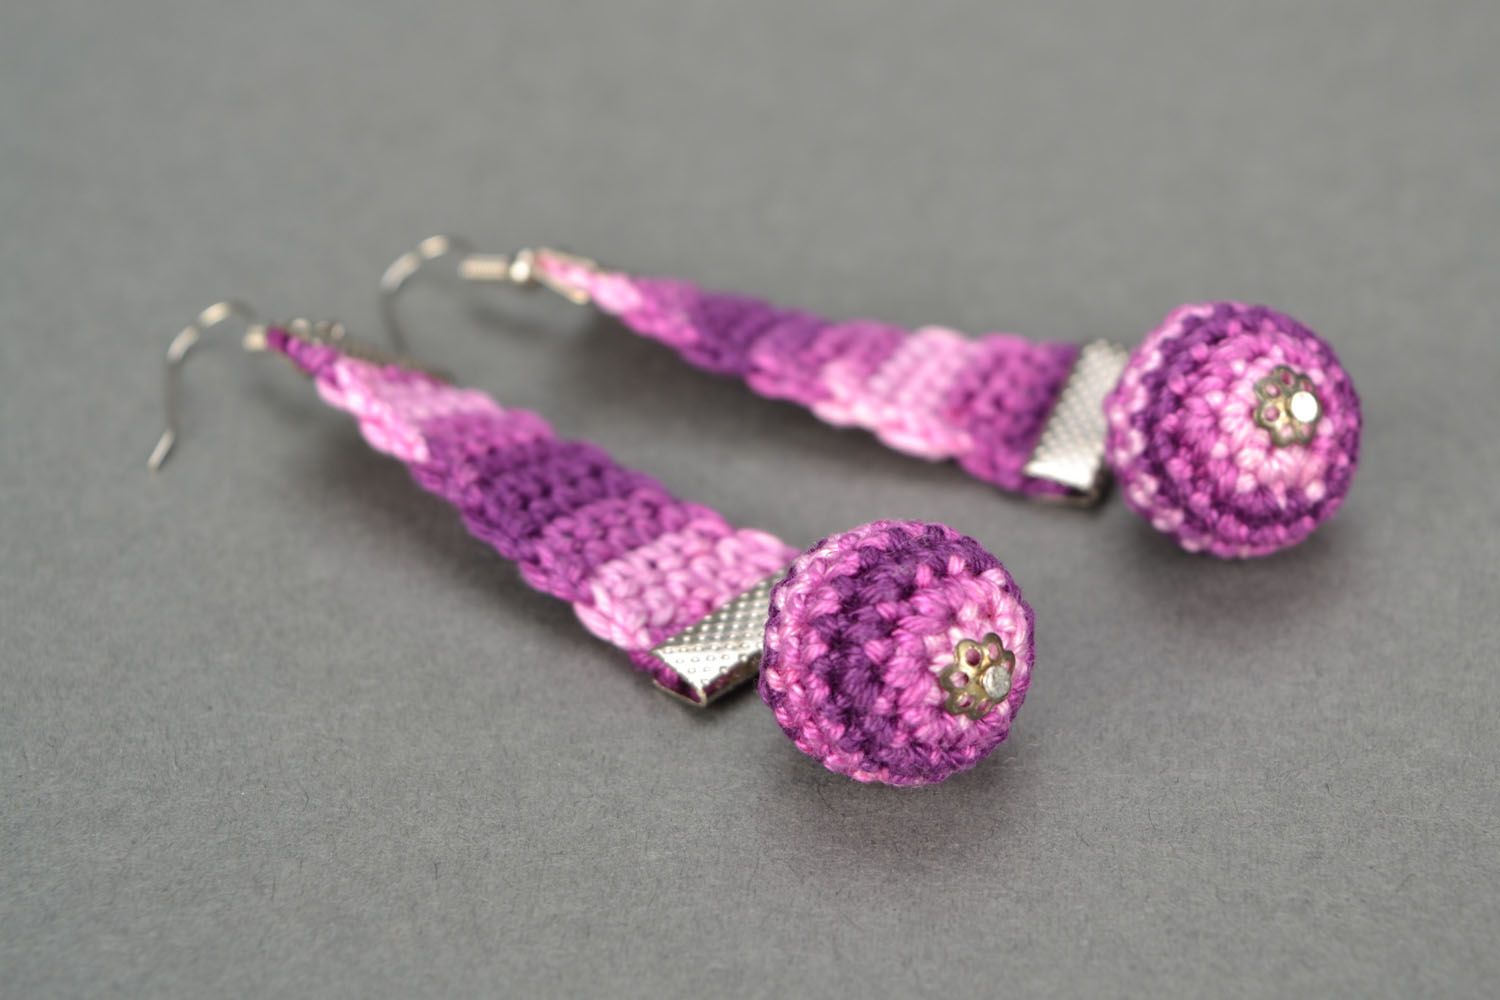 Homemade lace earrings with charms photo 5